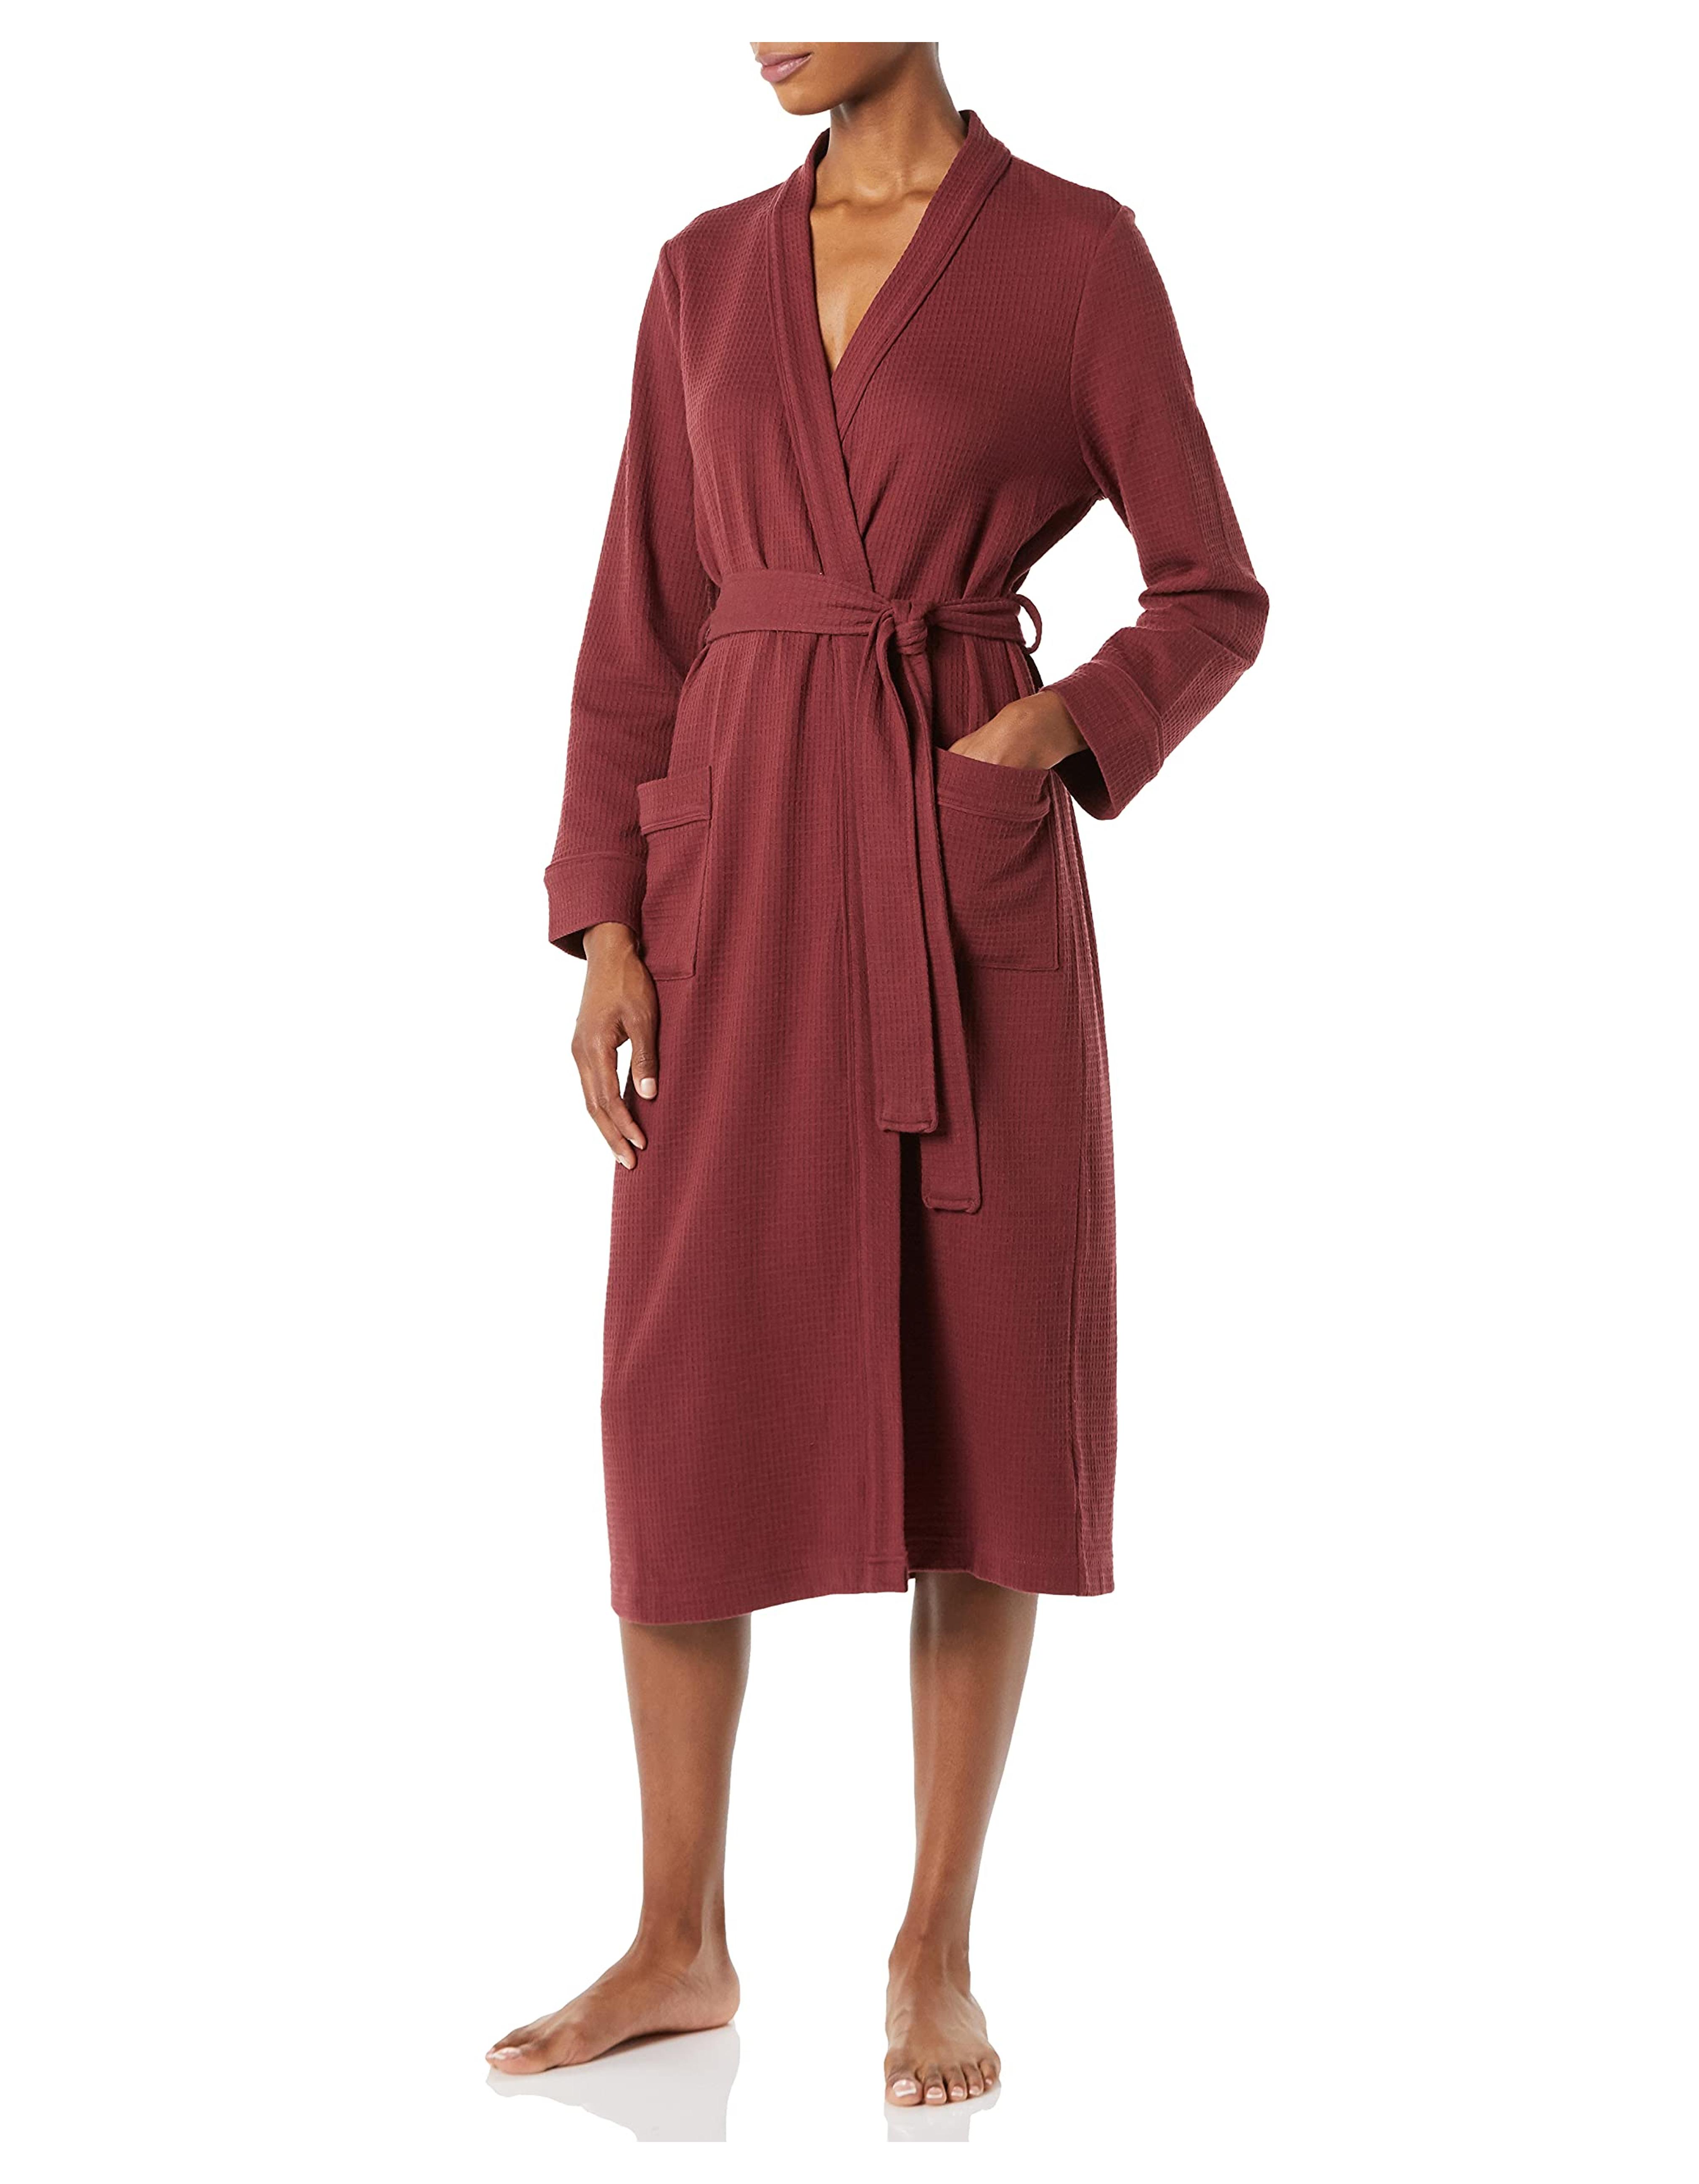 Amazon Essentials Women's Lightweight Waffle Full-Length Robe (Available in Plus Size)